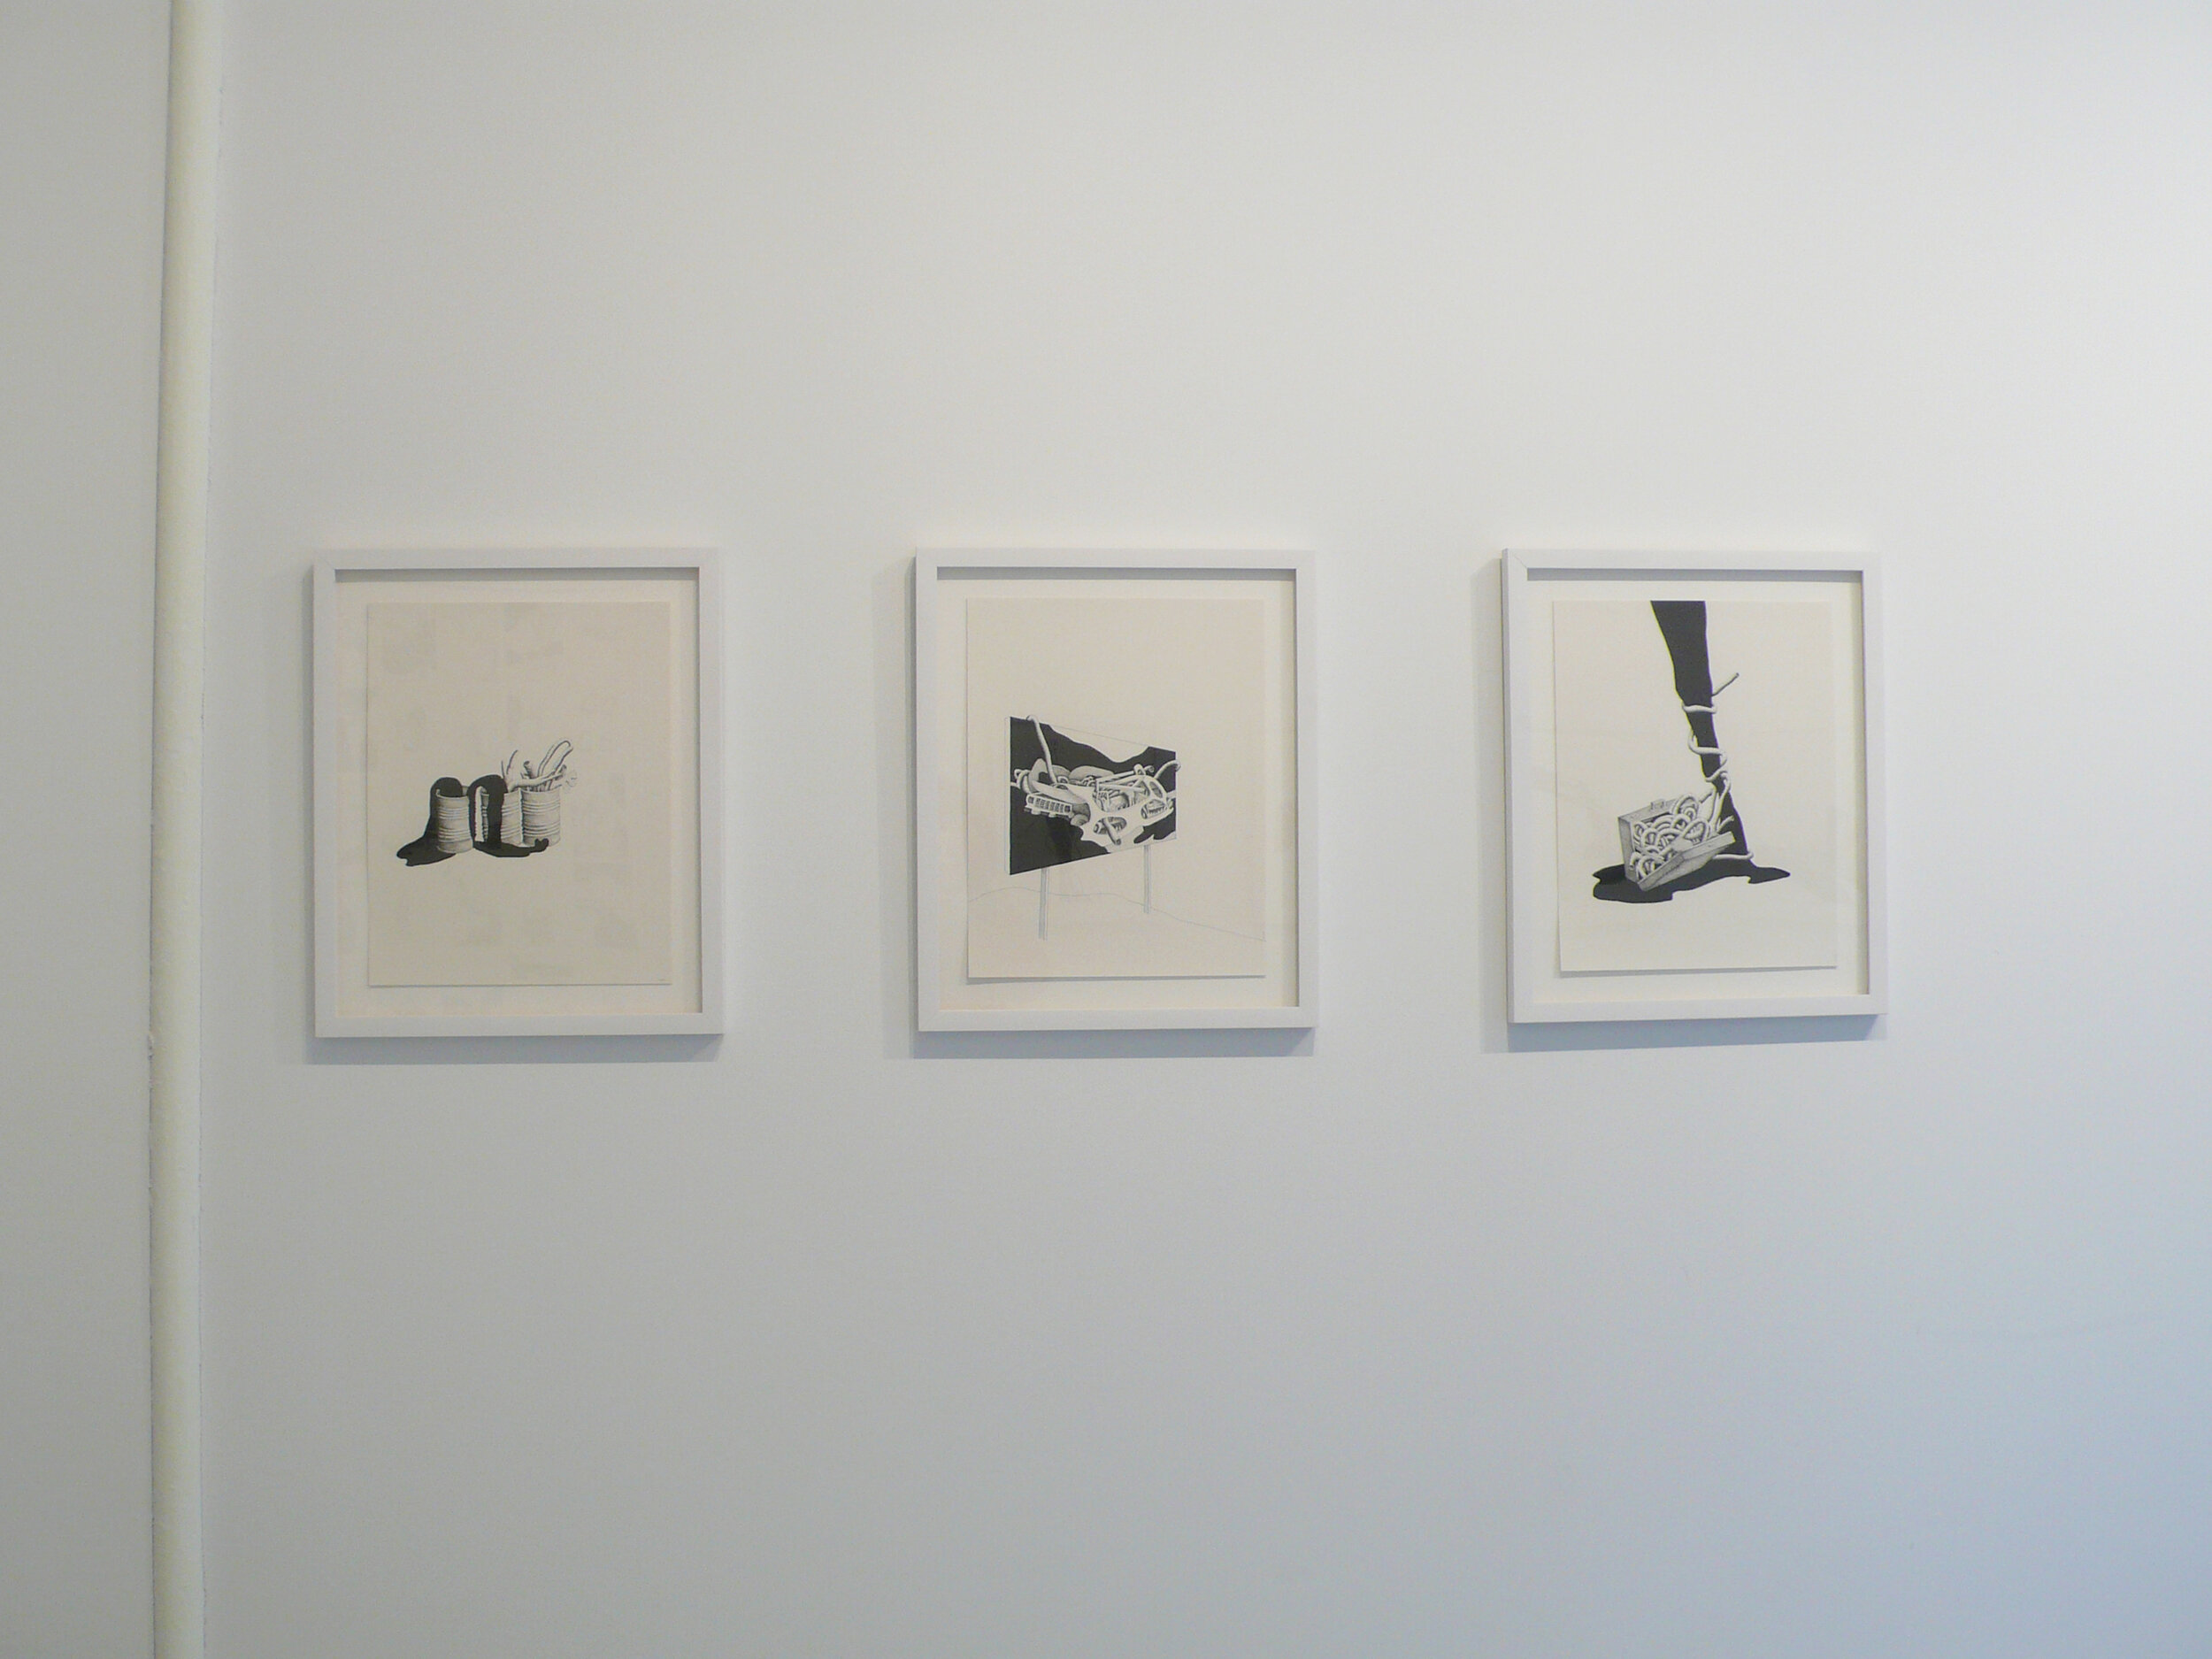 Installation image from the 2007 Catarina Leitão exhibition, THICKET, at Cindy Rucker Gallery, Number 35